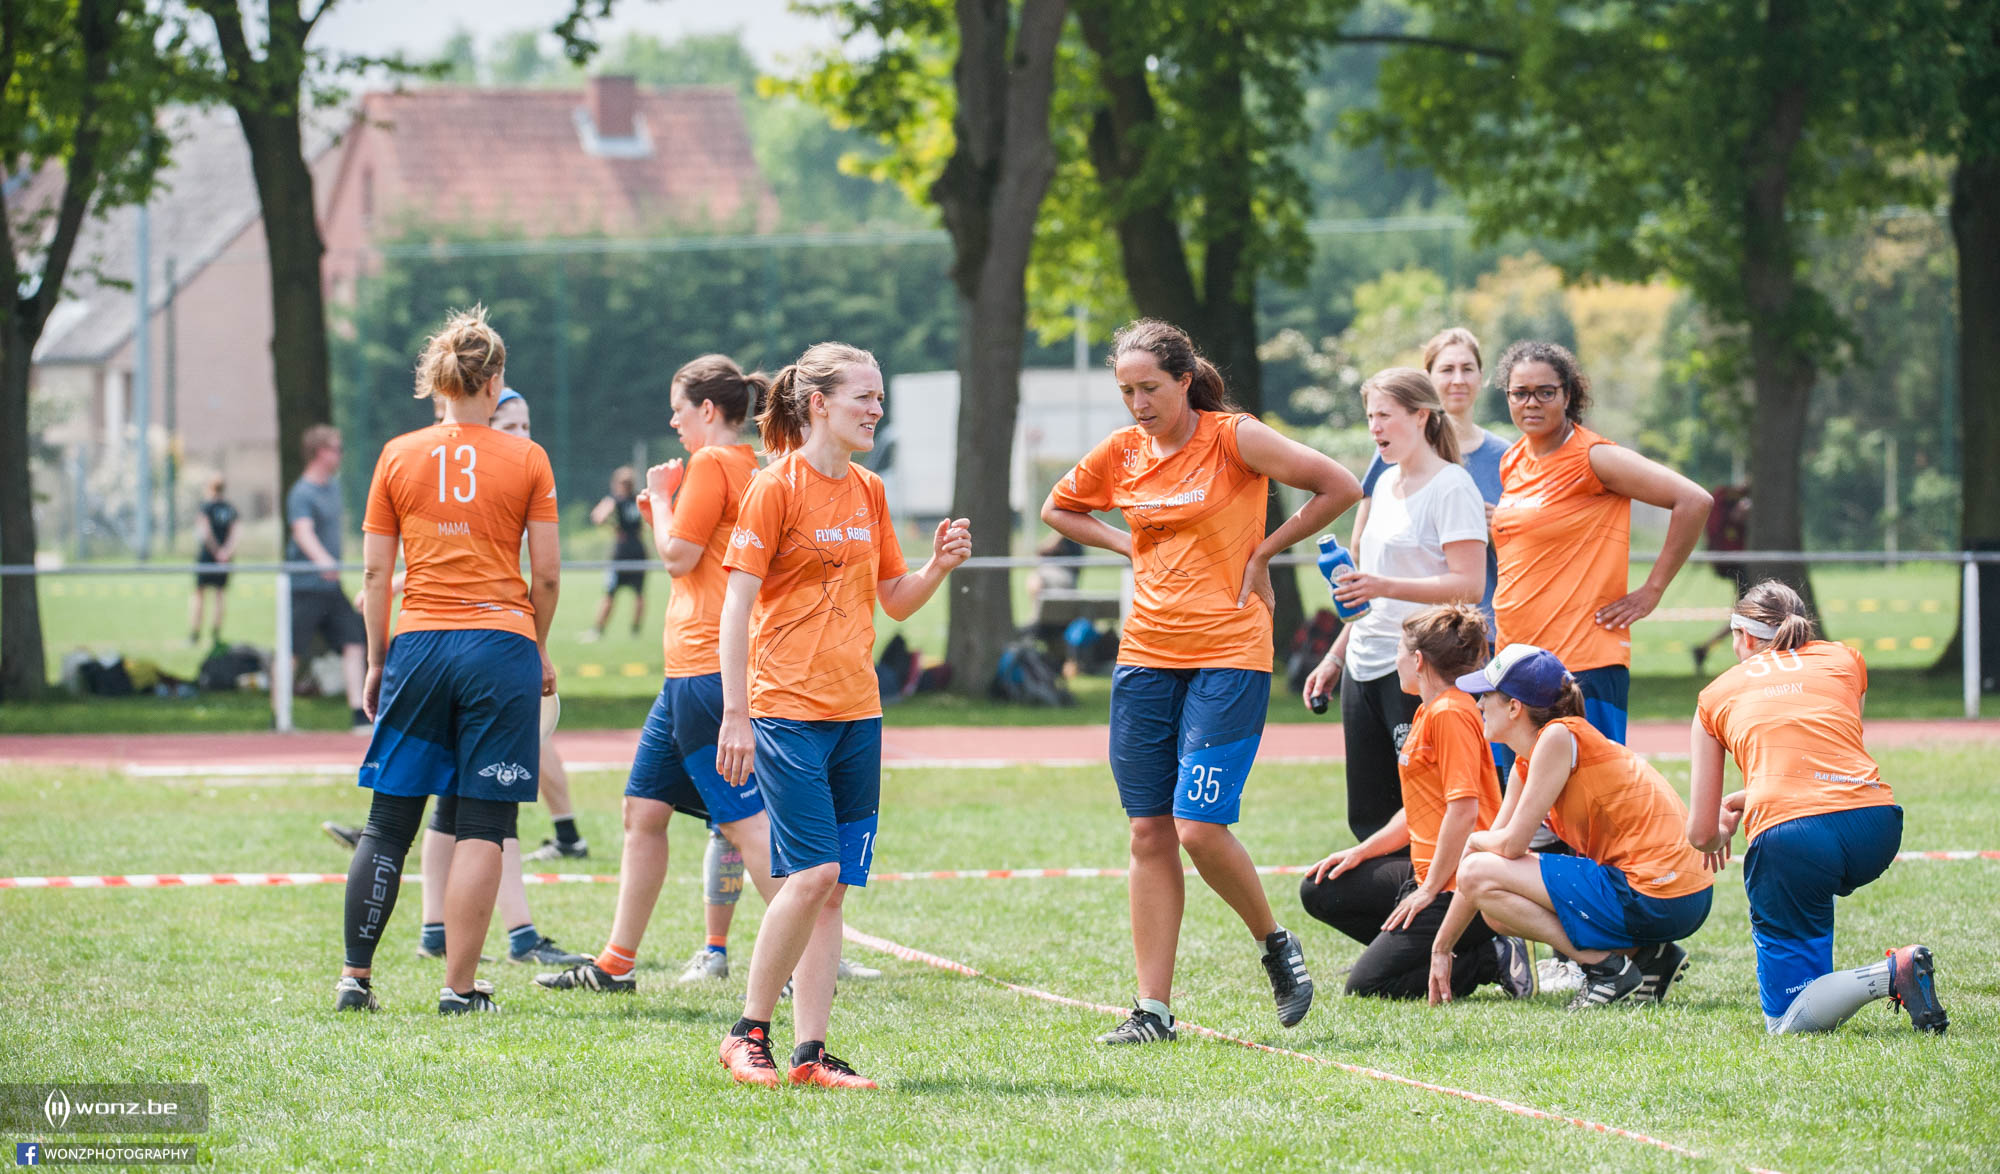 Belgian Ultimate Outdoor Championships (Open and Woman) by wonz.be